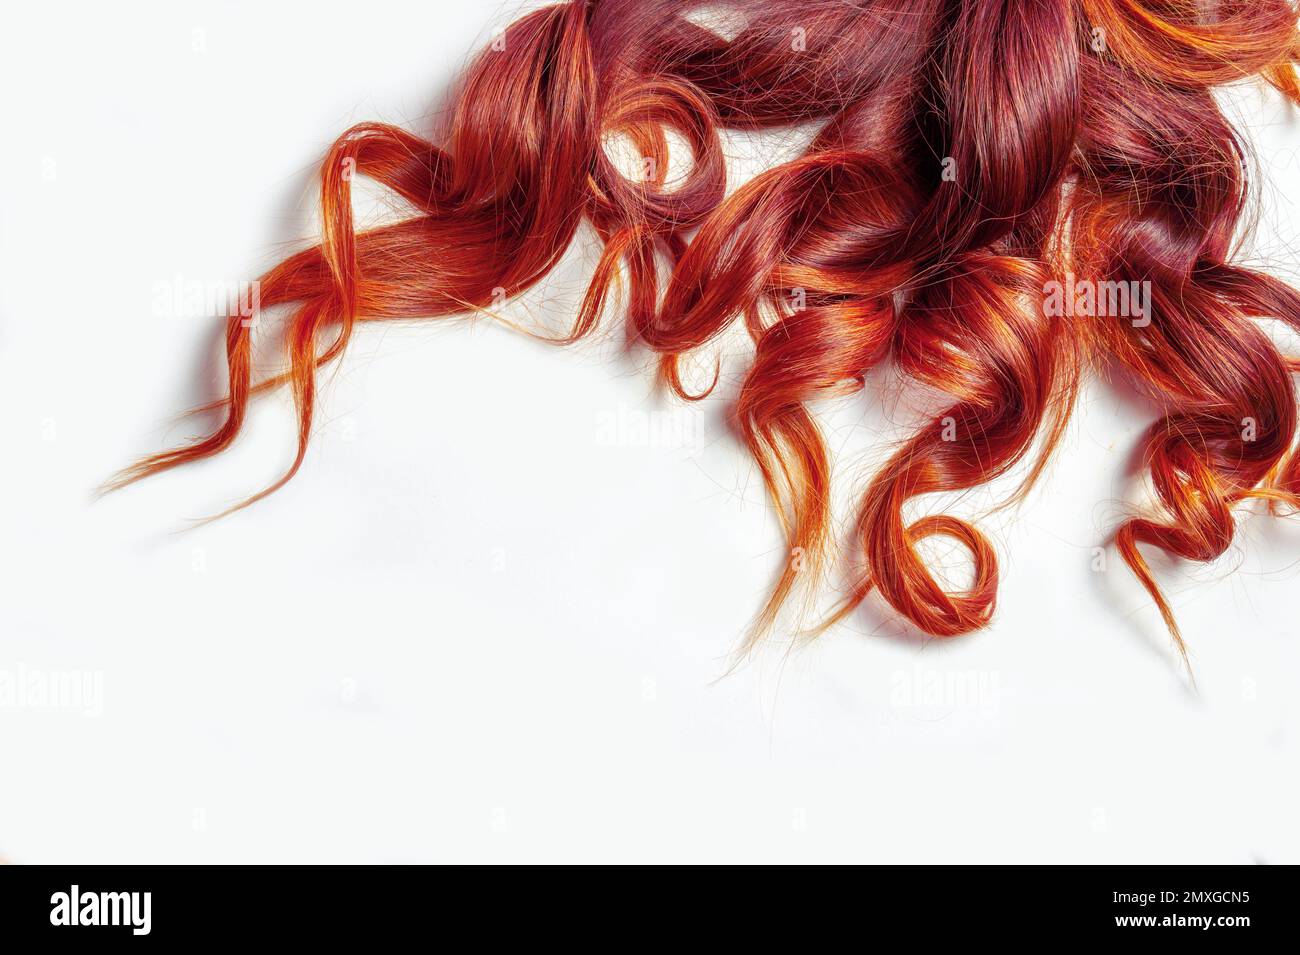 dark red curly hair on isolated white background Stock Photo